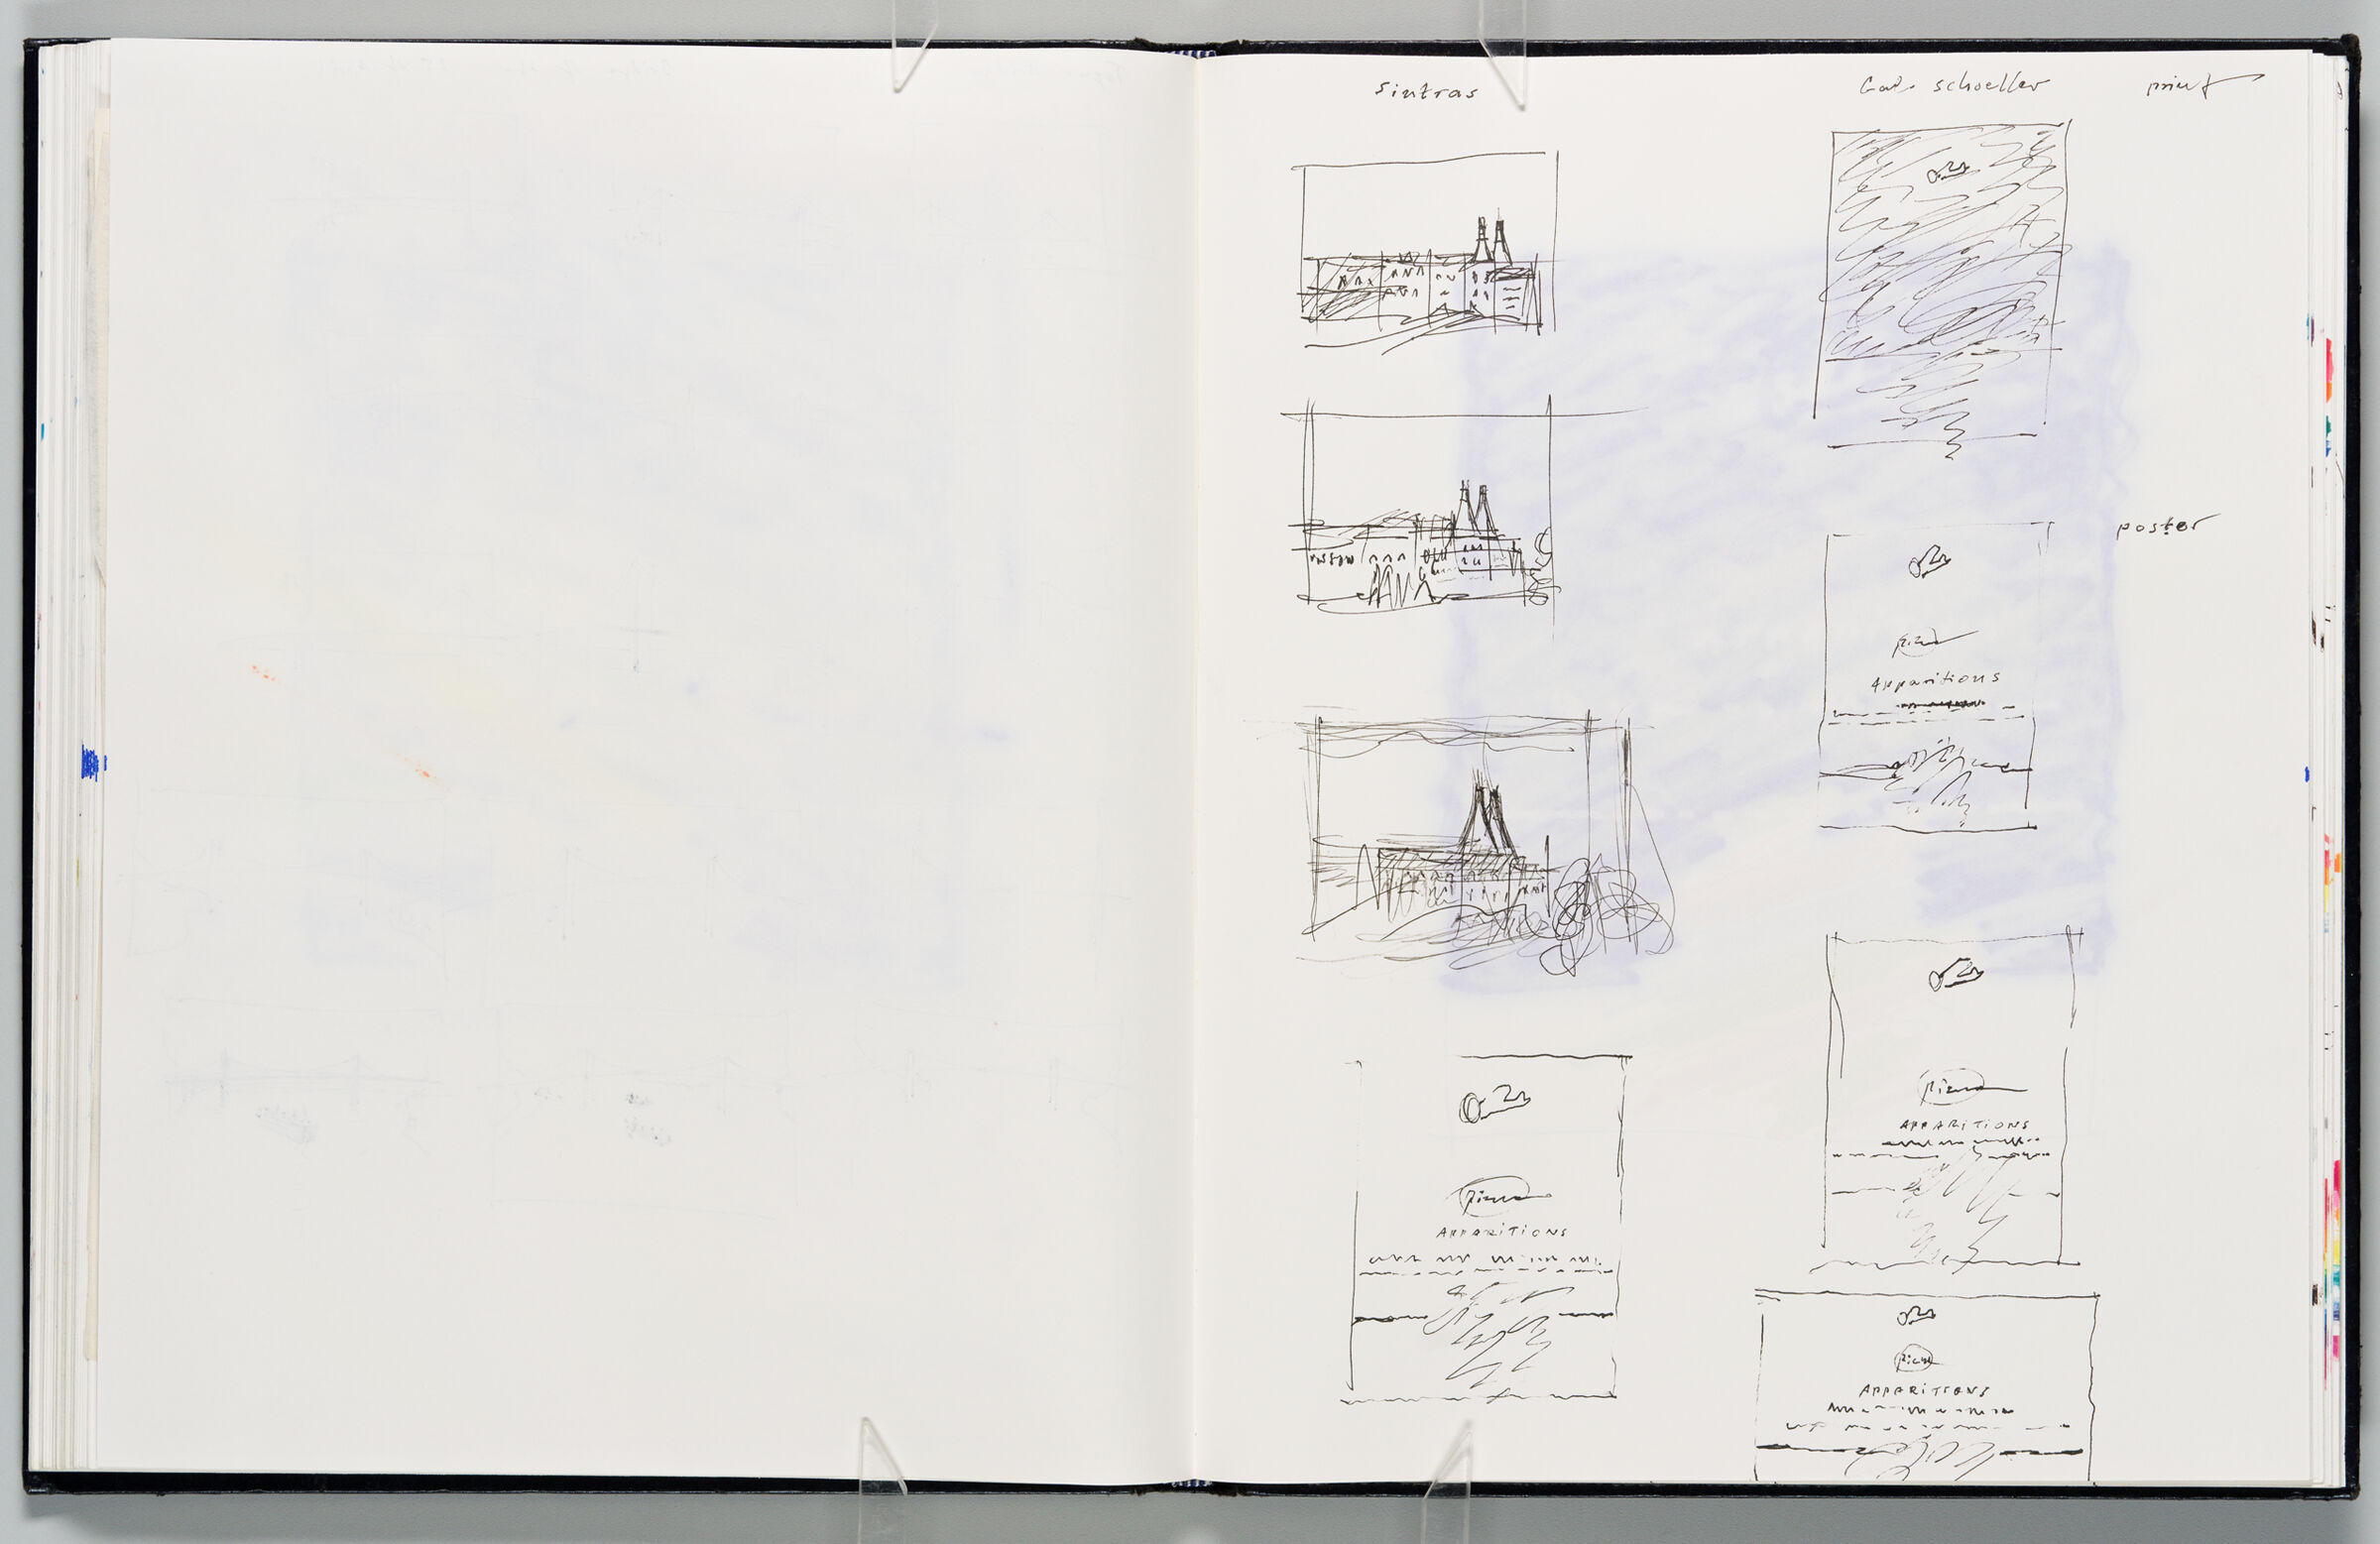 Untitled (Blank With Color Transfer, Left Page); Untitled (Sketches Of Sintras, Prints, And Poster With Color Transfer, Right Page)